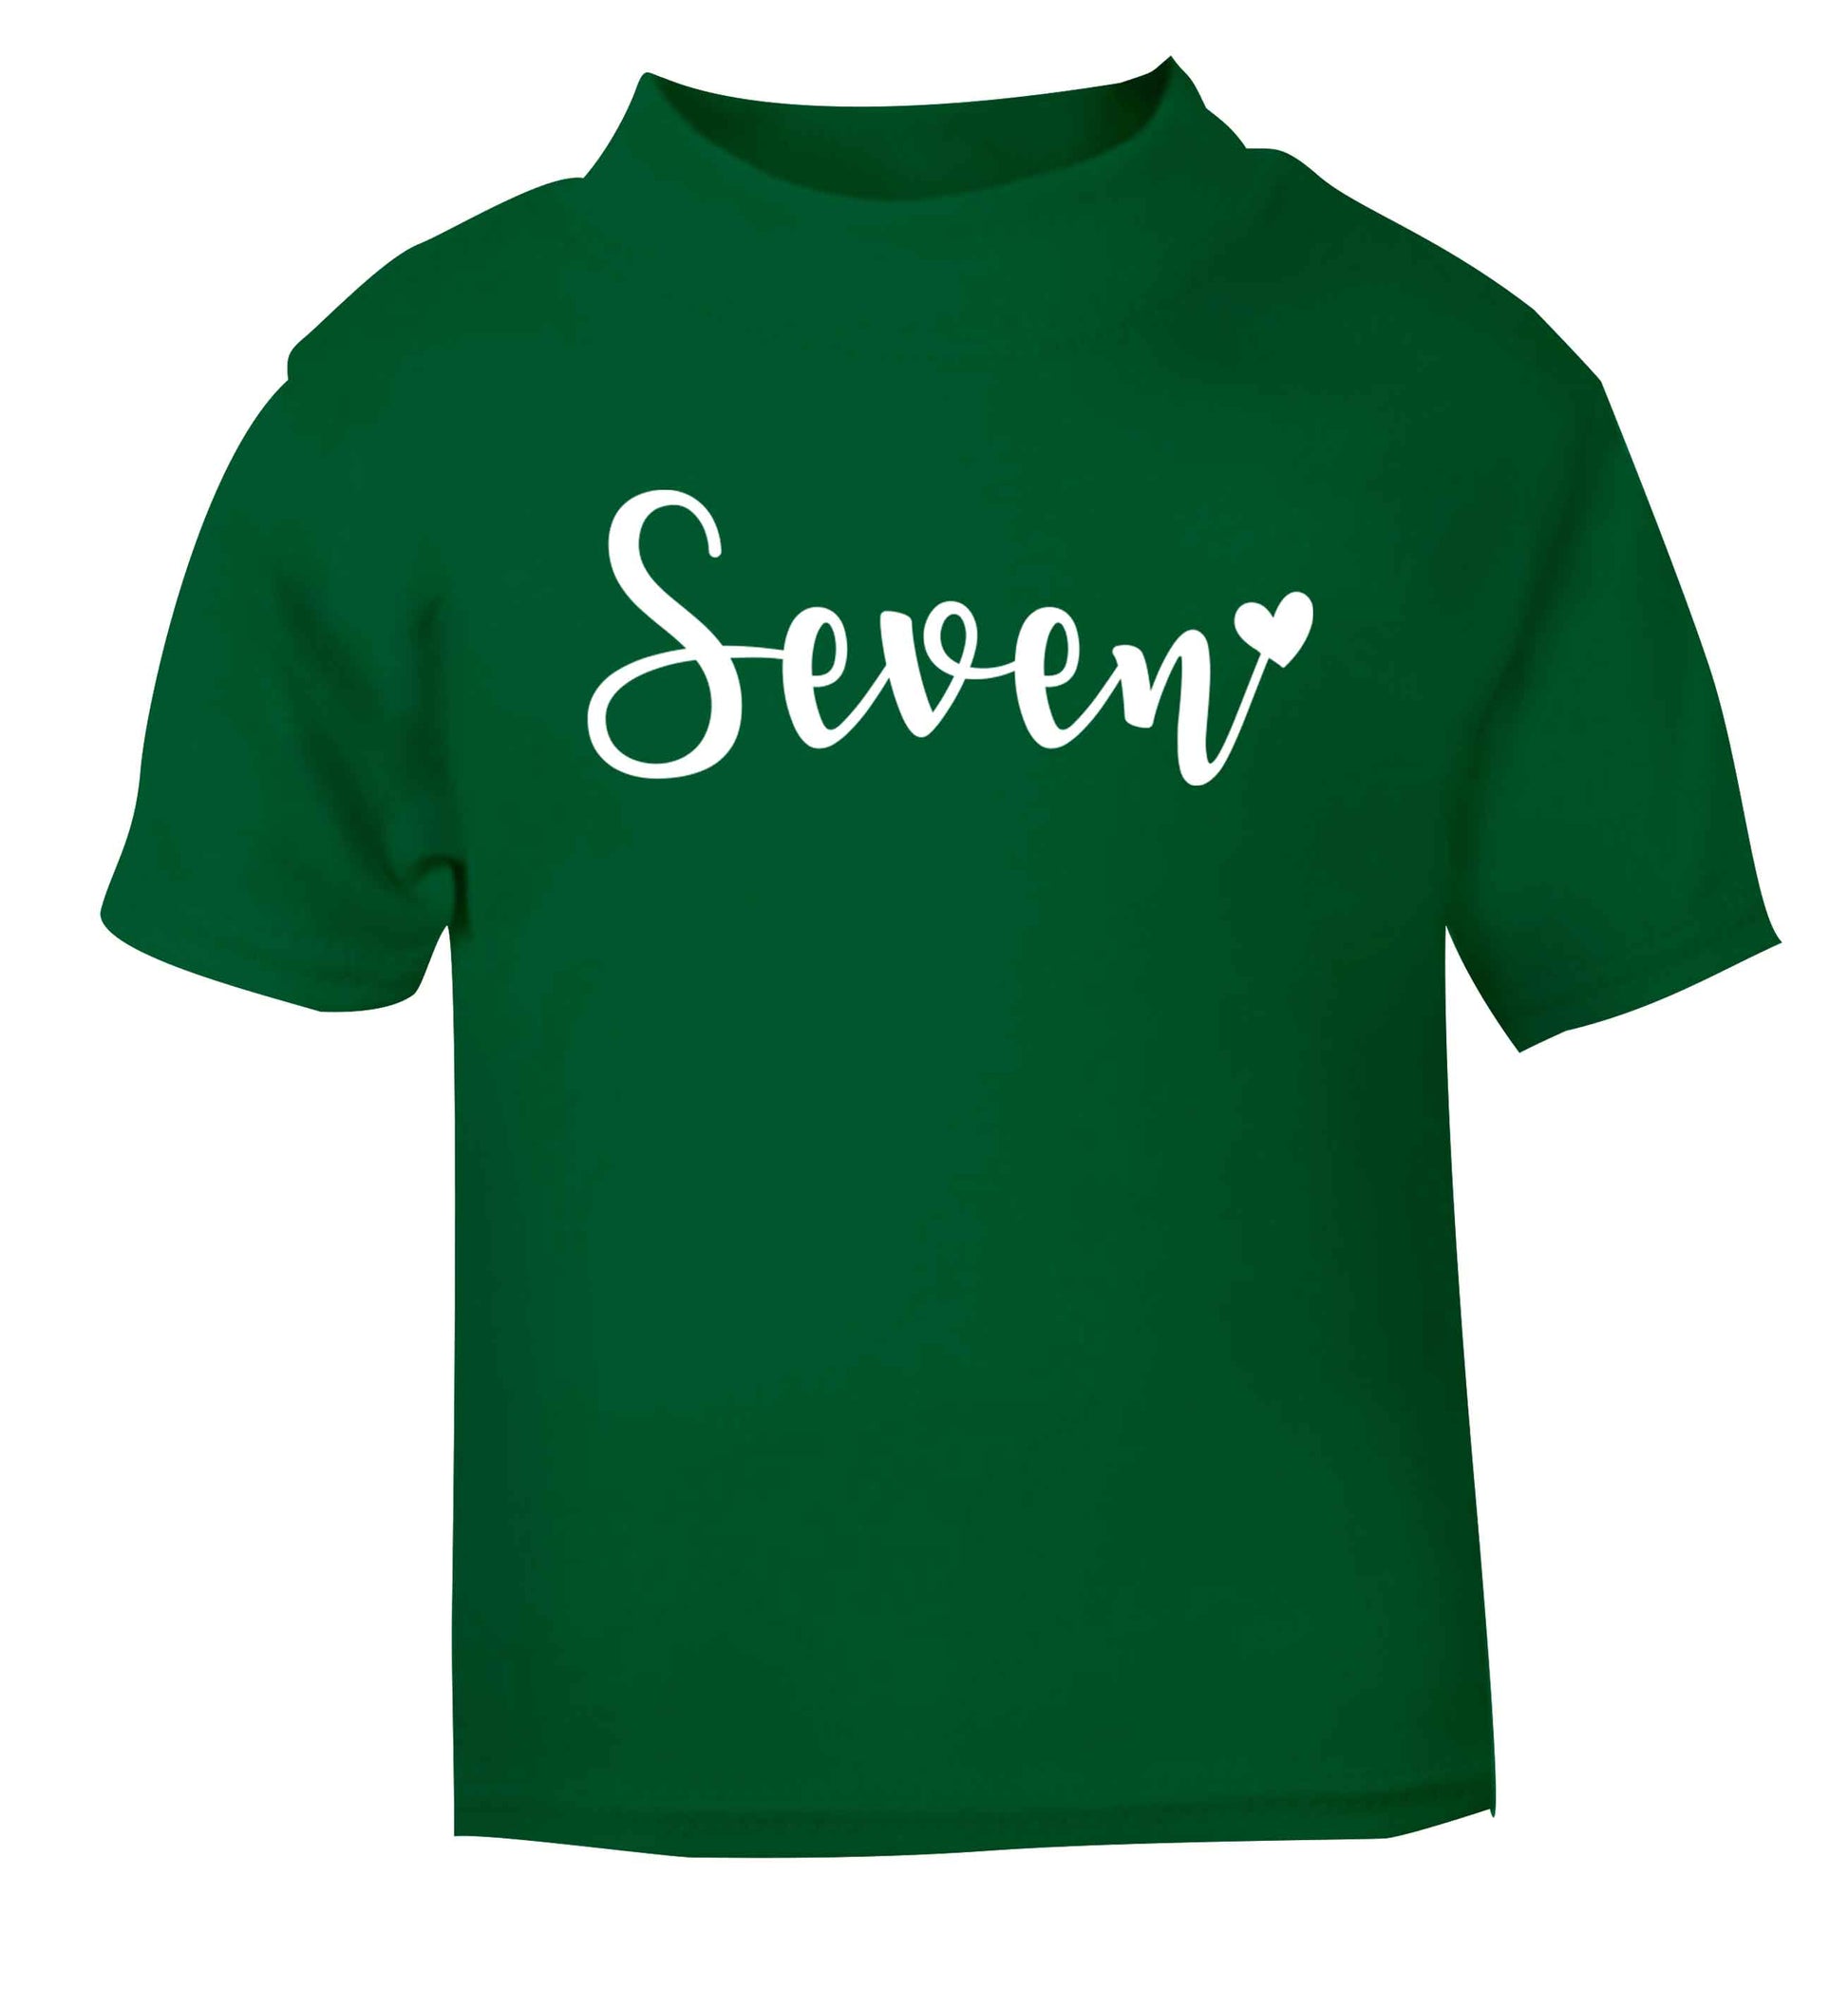 Seven and heart green baby toddler Tshirt 2 Years